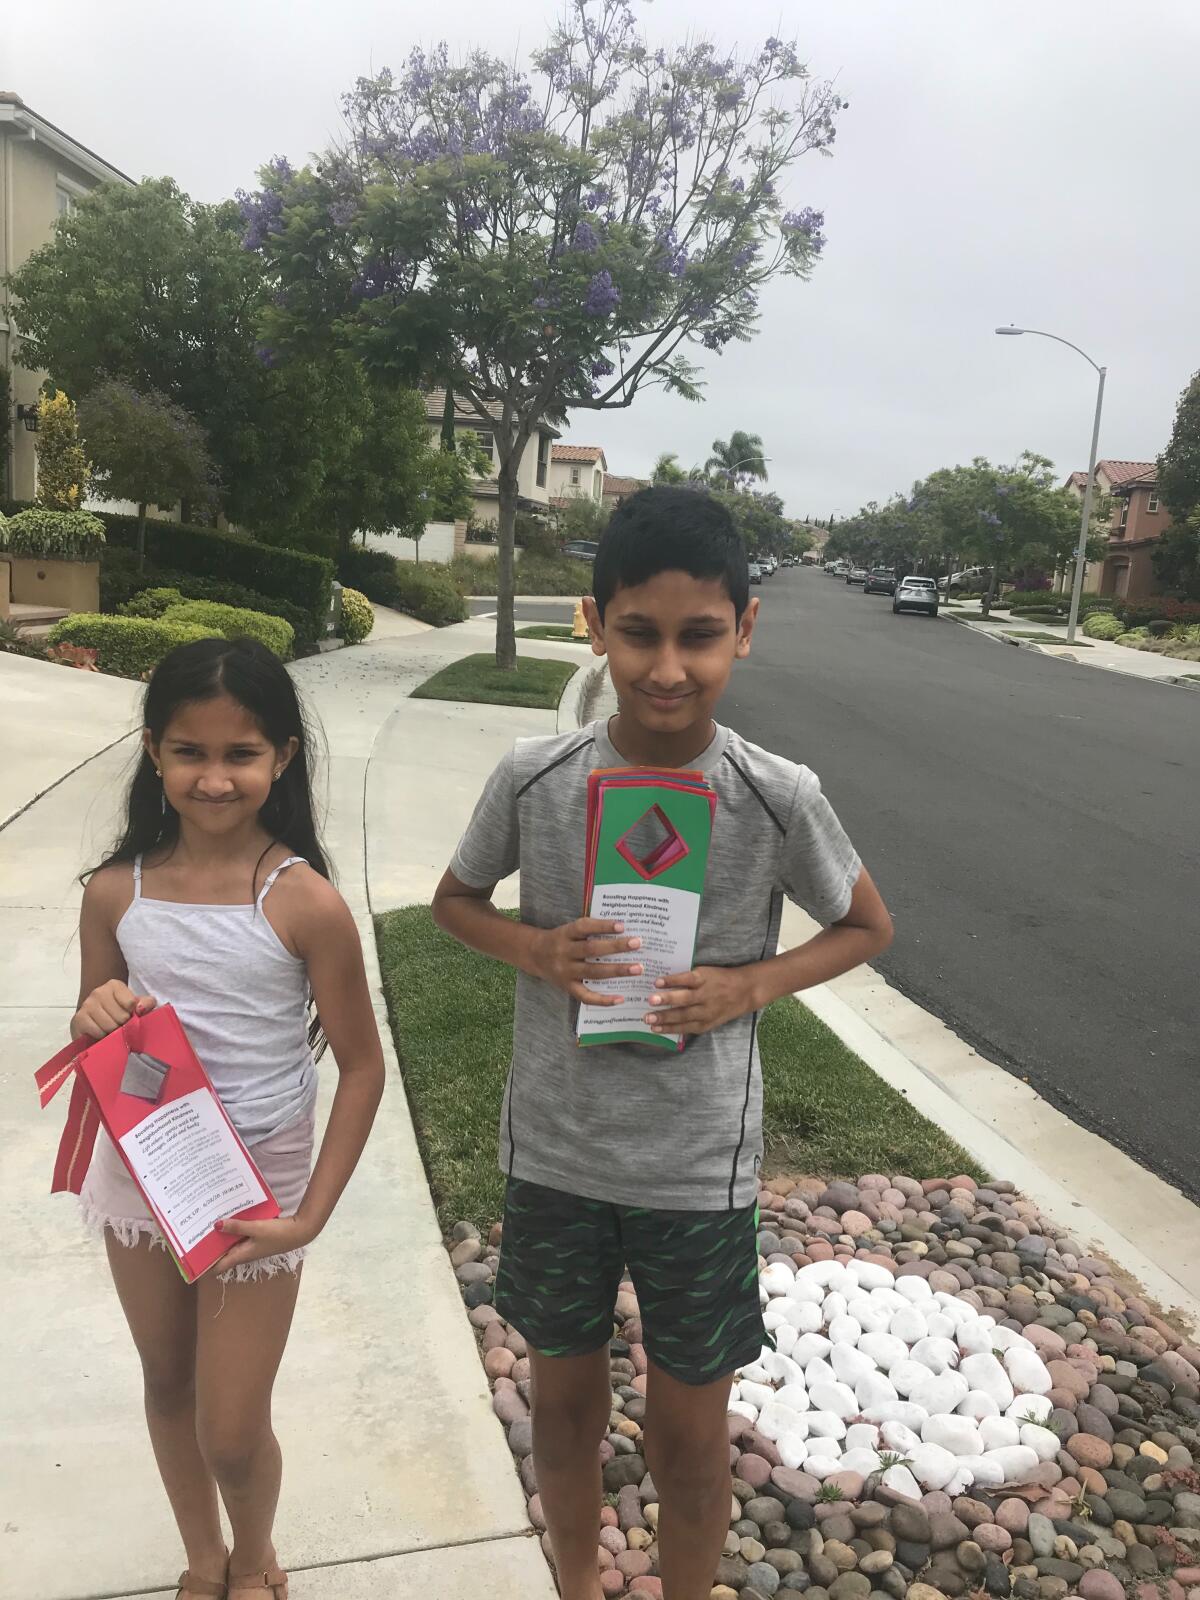 Maya and Dhruv Bantval distributed flyers for their drive in their neighborhood.